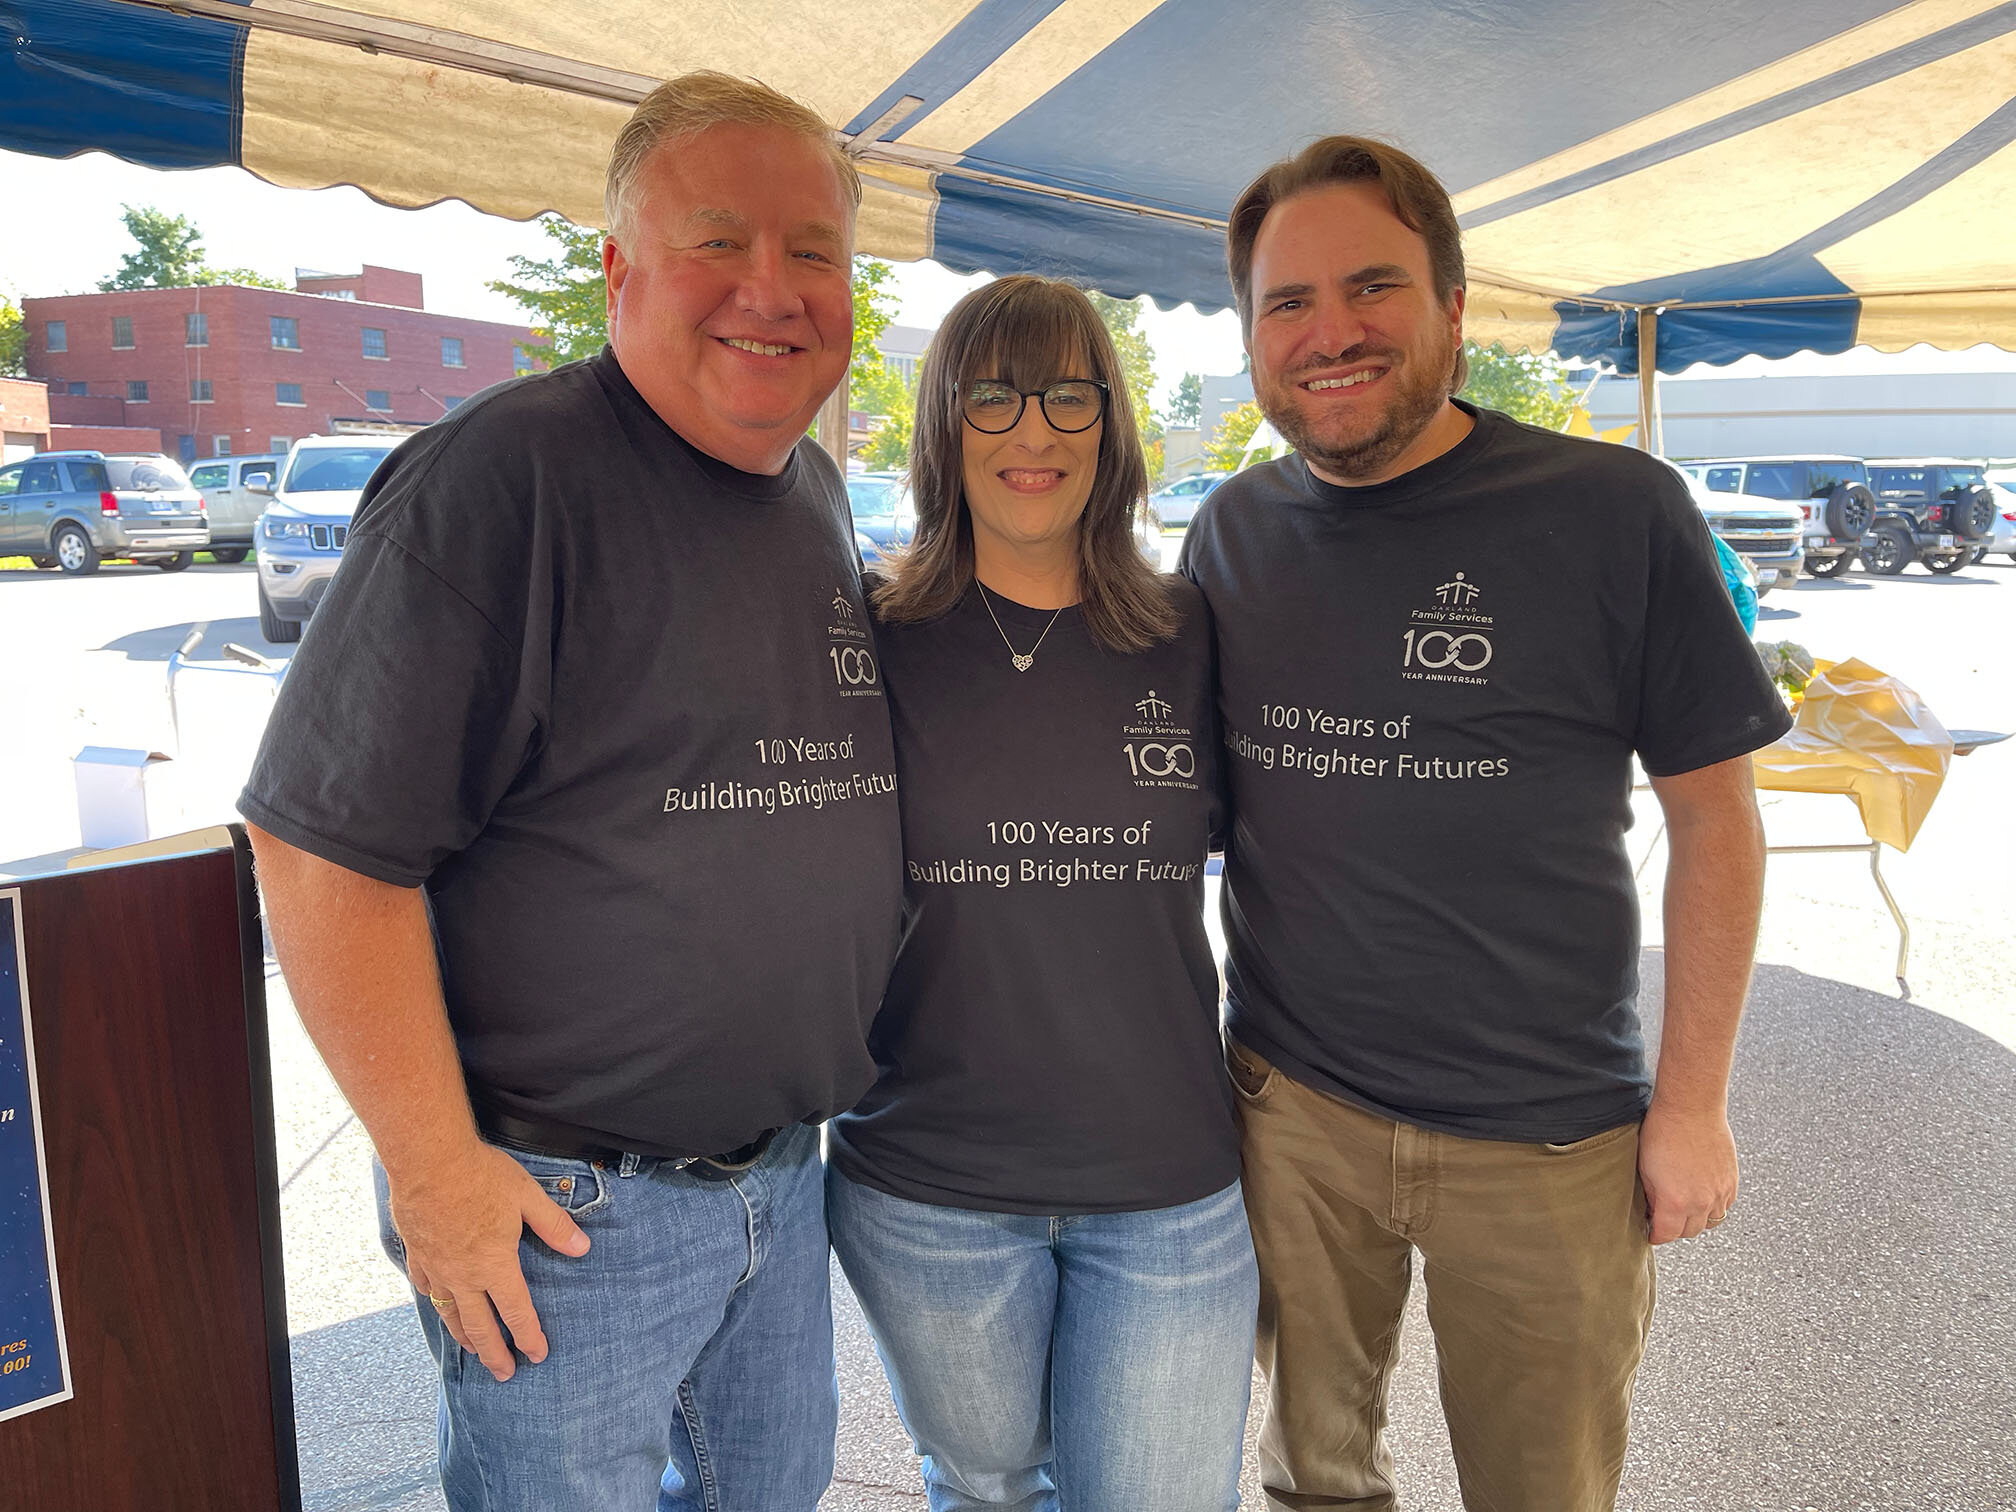  From the left are Oakland Family Services’ Board Chair Ron Hillard, President and CEO Jaimie Clayton, and Vice Chair Brian Newman.  